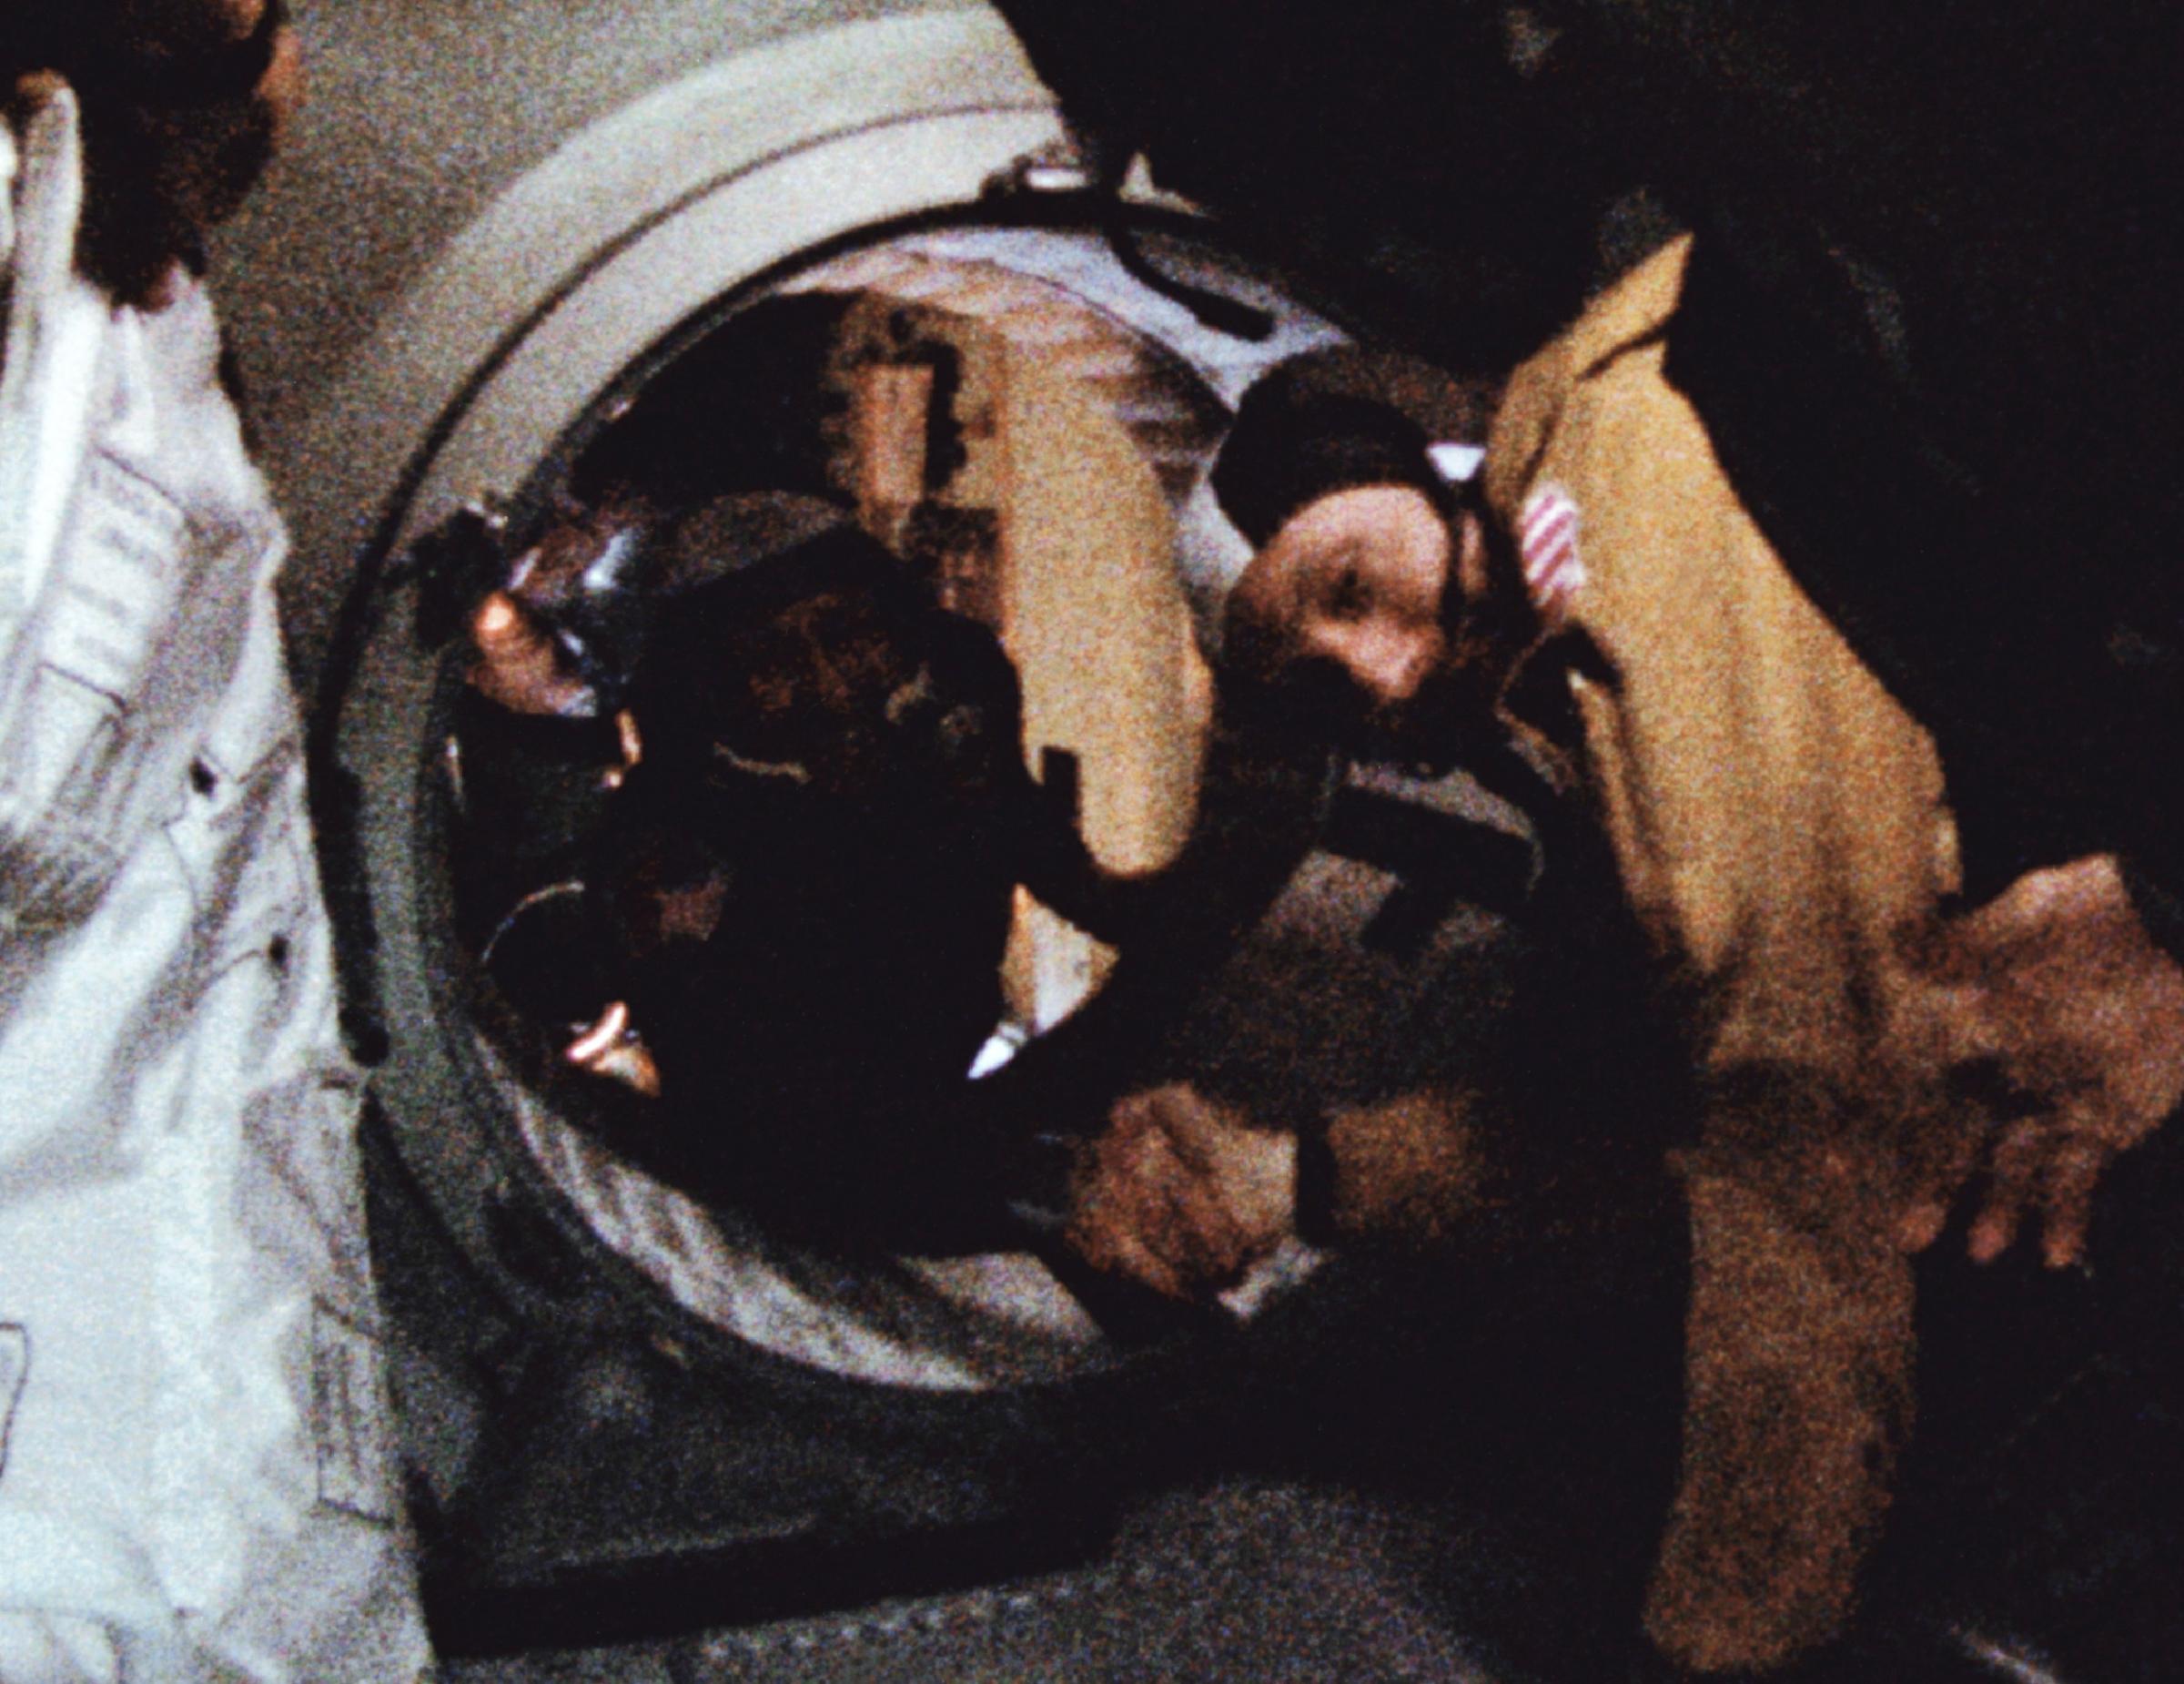 Astronaut Tom Stafford (in foreground) and cosmonaut Alexei Leonov make their historic handshake in space on July 17, 1975.